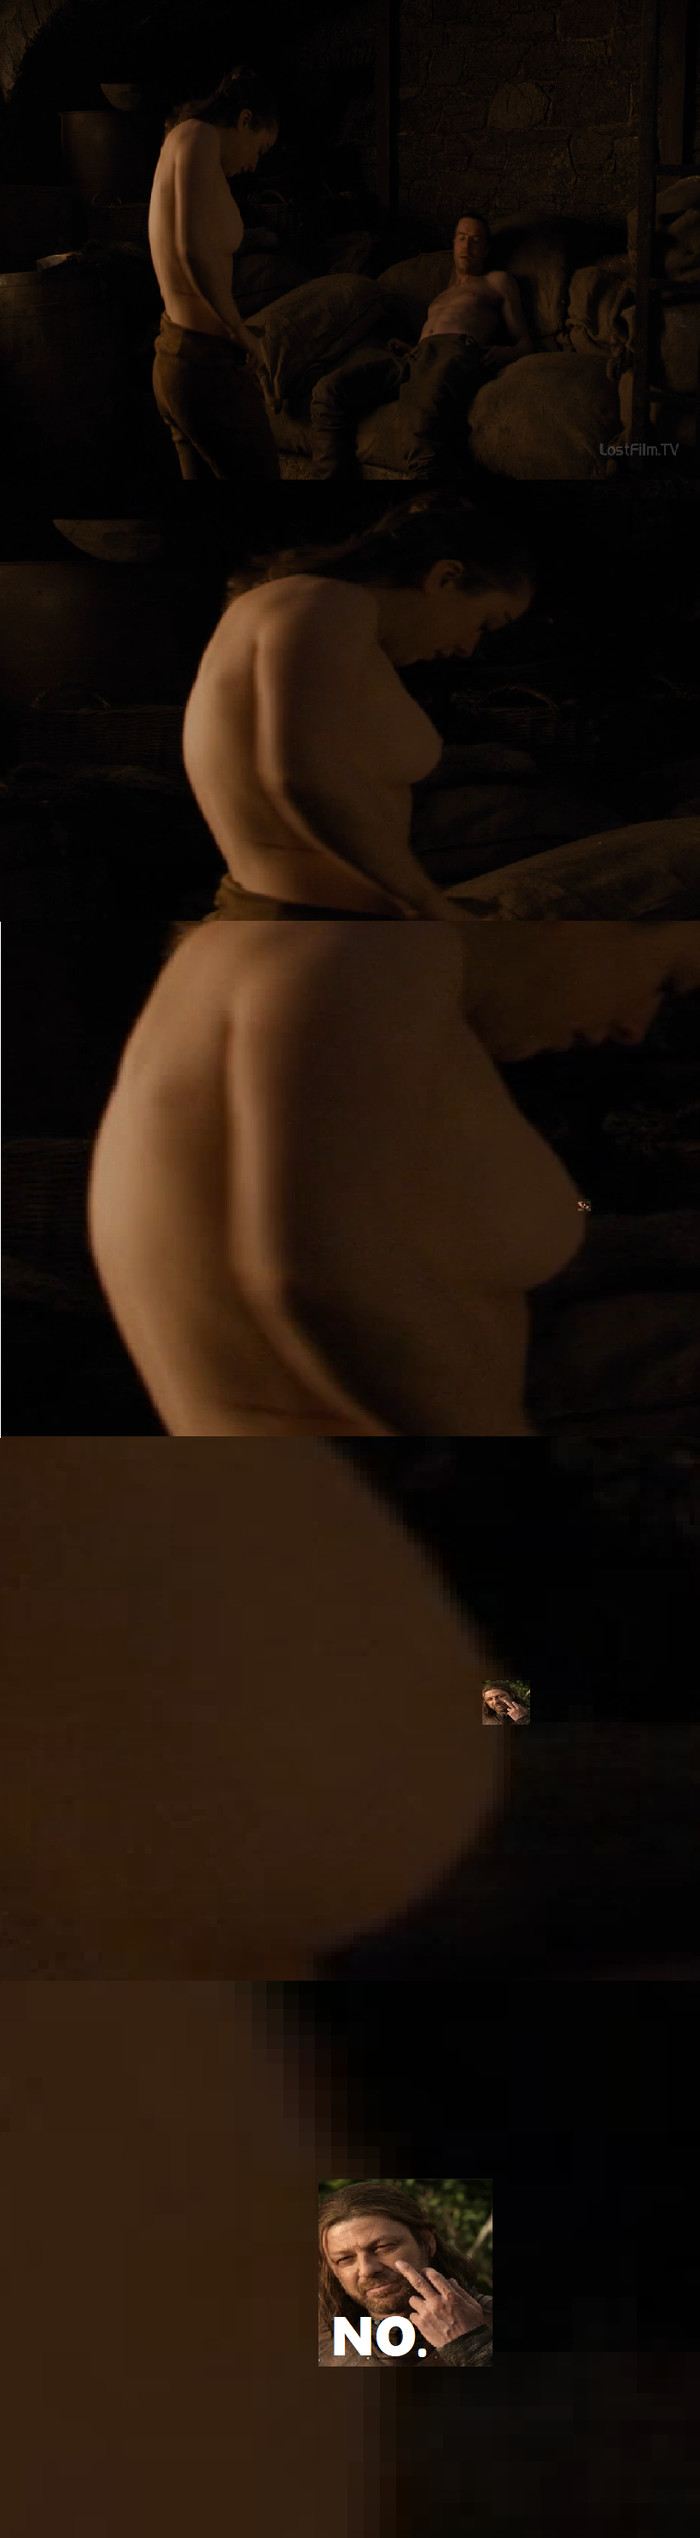 Eddard is on the lookout - NSFW, My, Game of Thrones, Lostfilm, Longpost